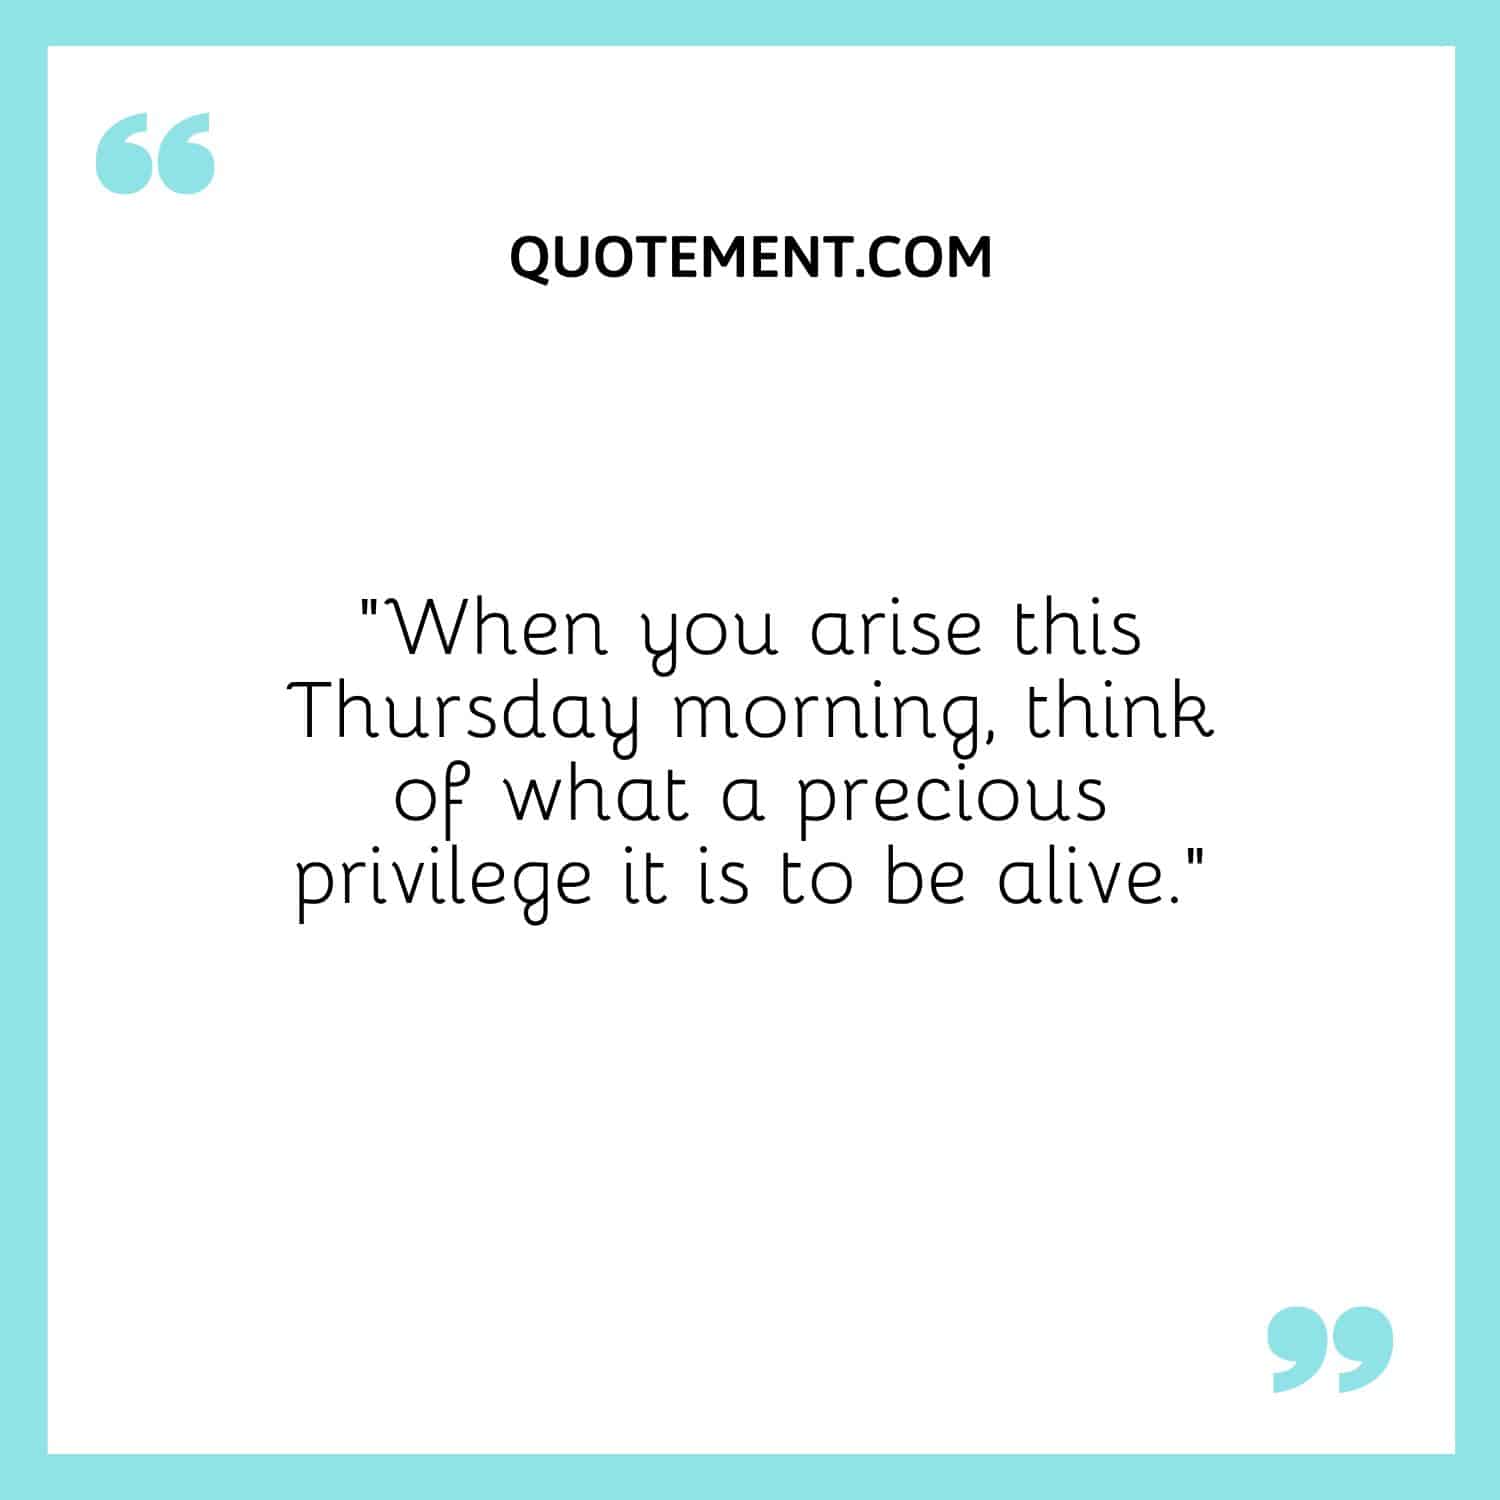 “When you arise this Thursday morning, think of what a precious privilege it is to be alive.”